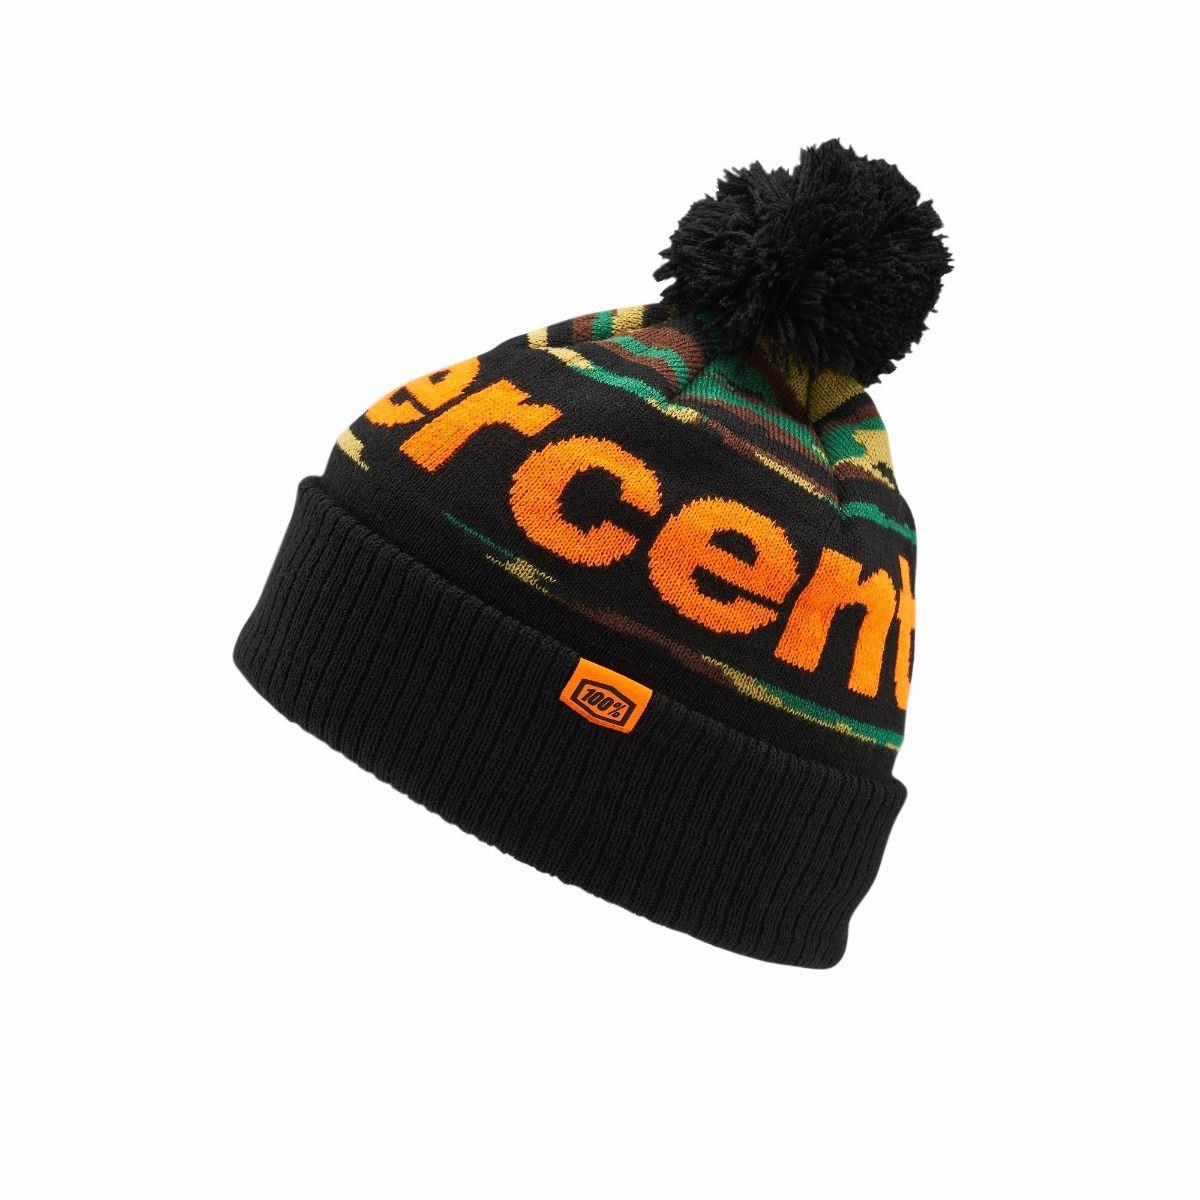 100% Rise Cuff Beanie product image